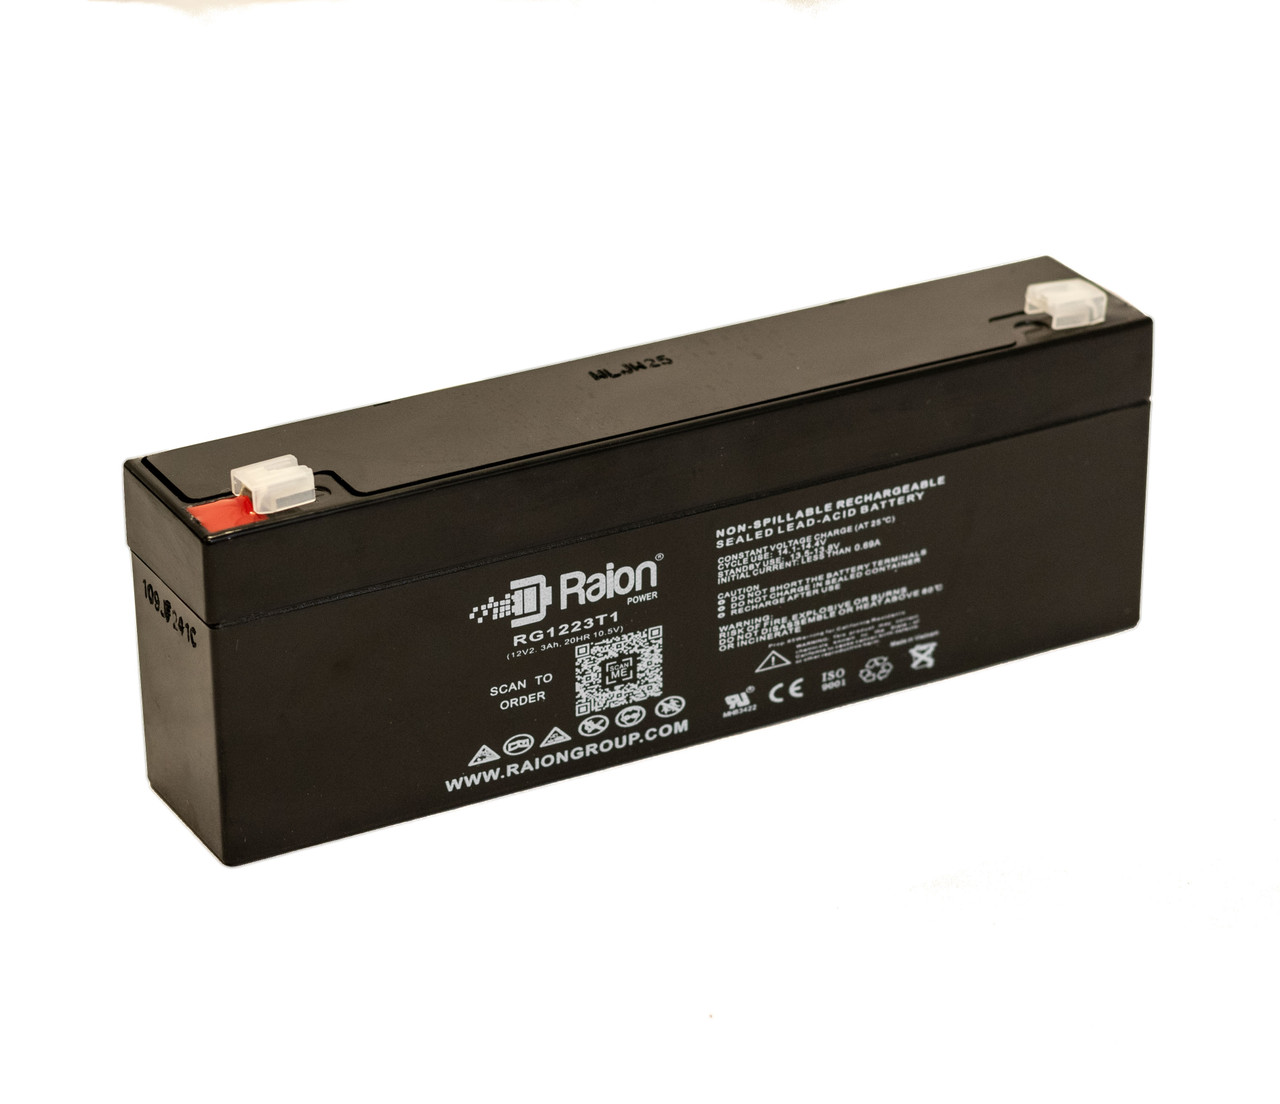 Raion Power RG1223T1 Replacement Battery for Portalac PX12022